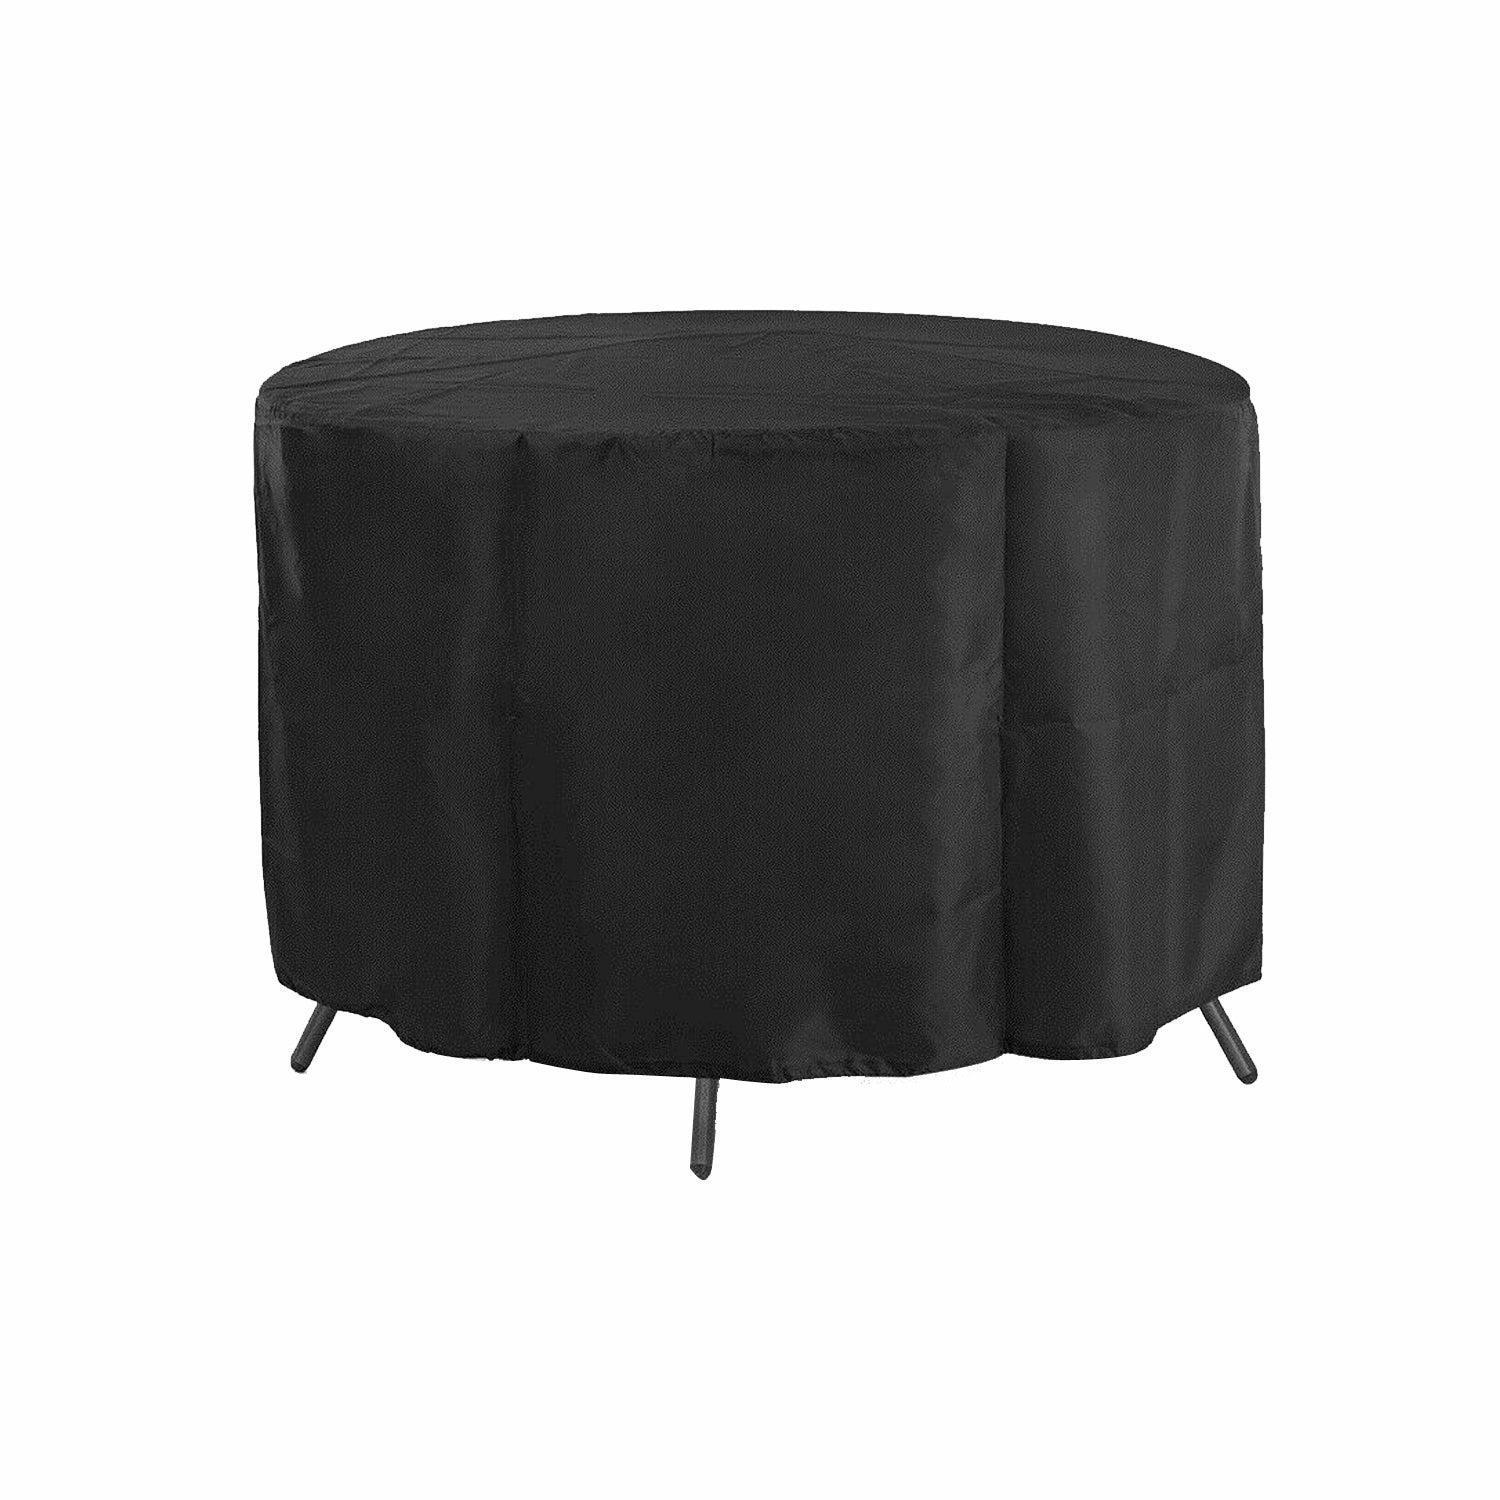 Outdoor Garden Shelter Furniture Round Waterproof Table Cover